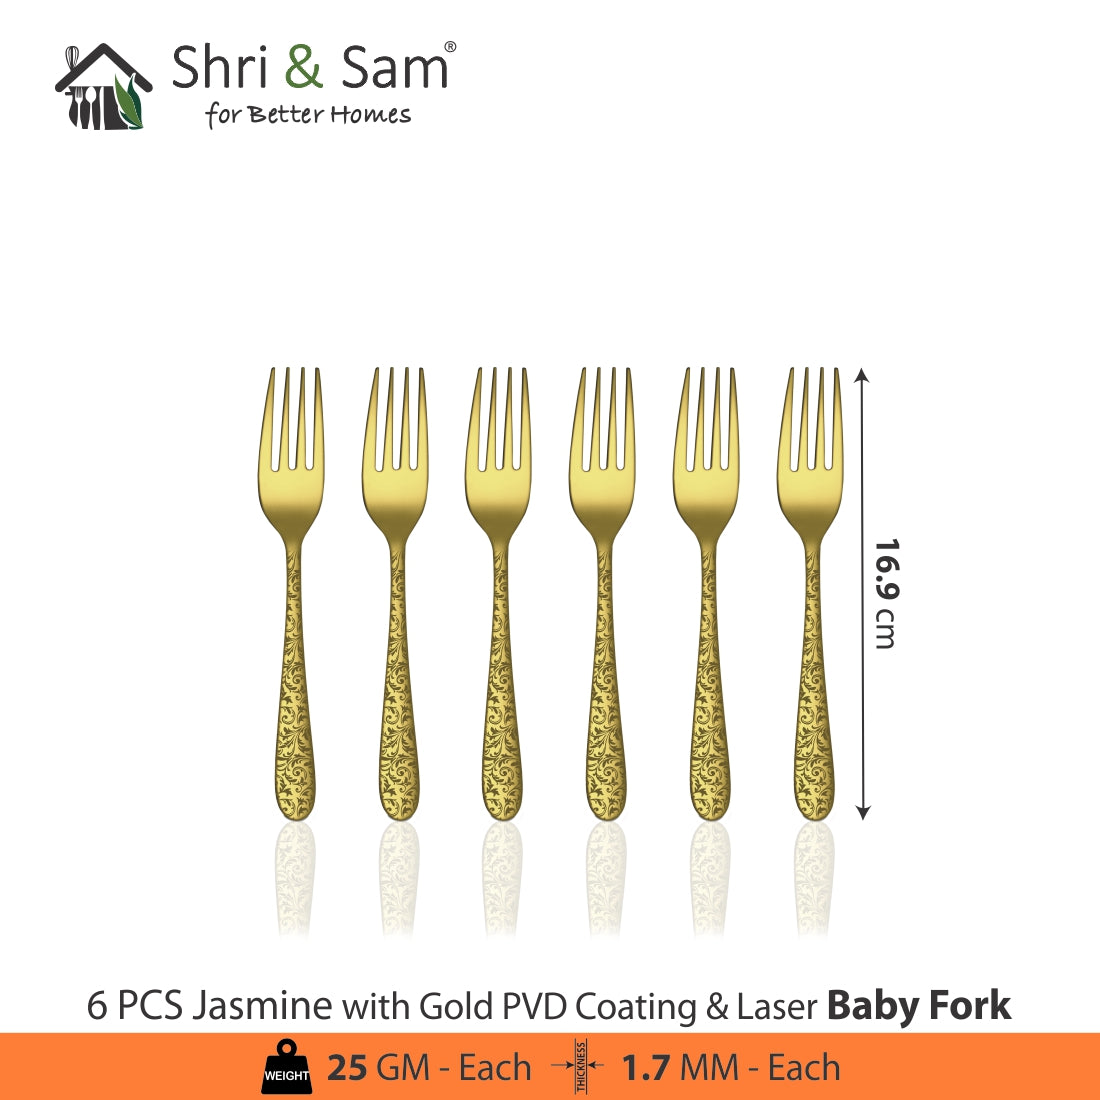 Stainless Steel Cutlery with Gold PVD Coating & Laser Jasmine